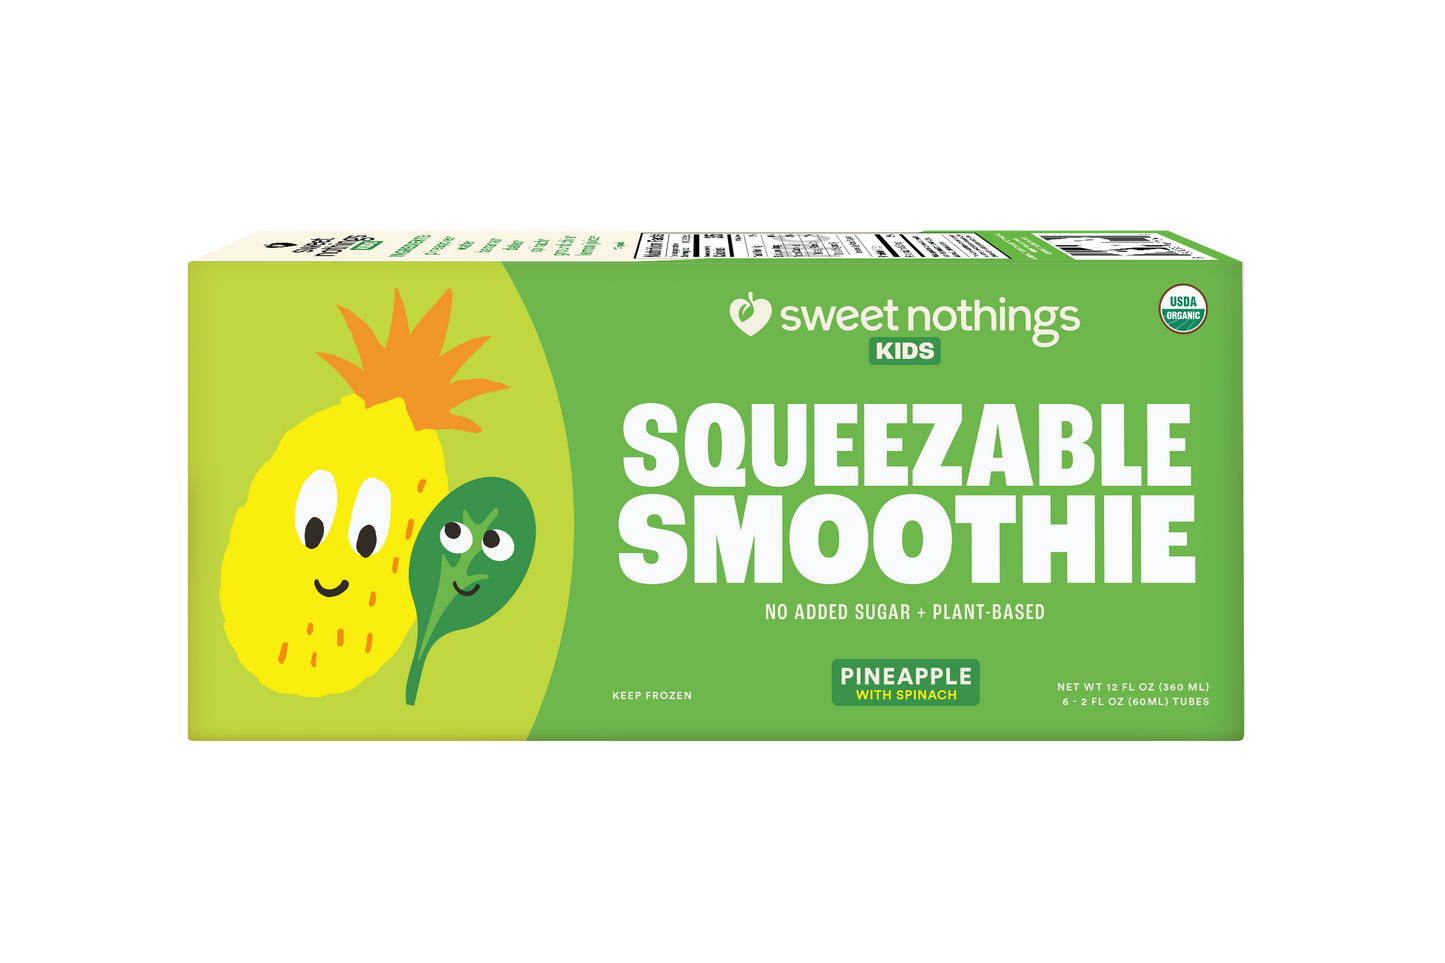 Sweet Nothings Pineapple Spinach Squeezable Smoothies